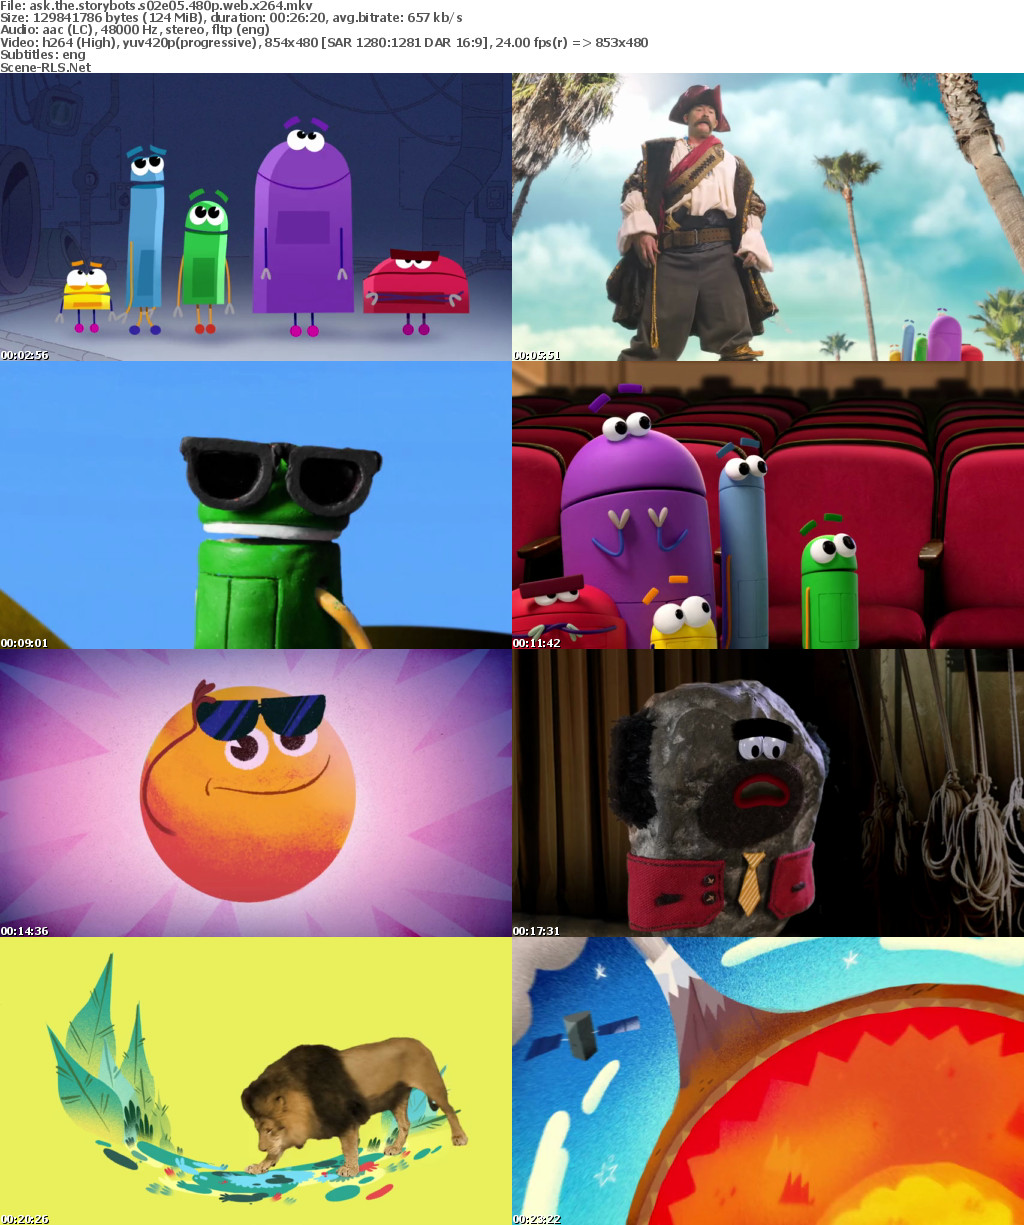 Ask the storybots episodes